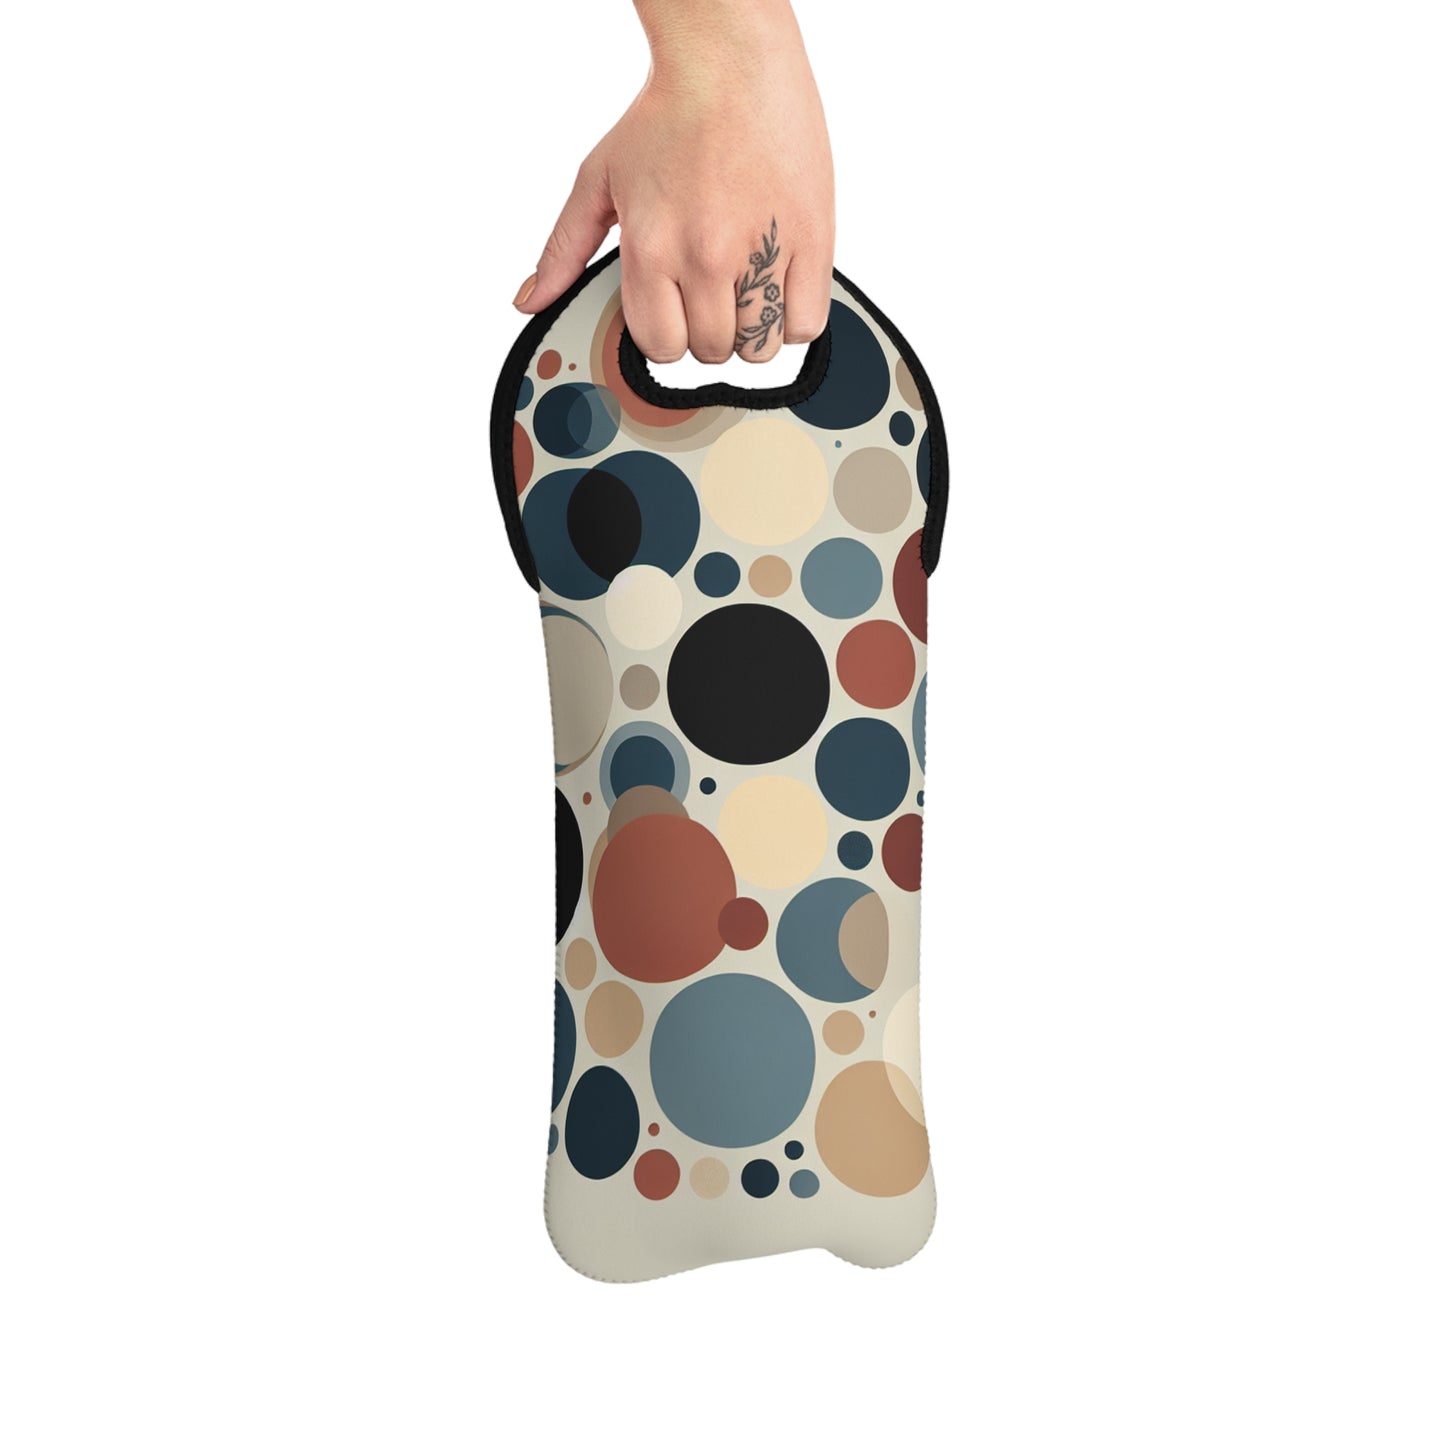 "Interwoven Circles: A Minimalist Approach" - The Alien Wine Tote Bag Minimalism Style